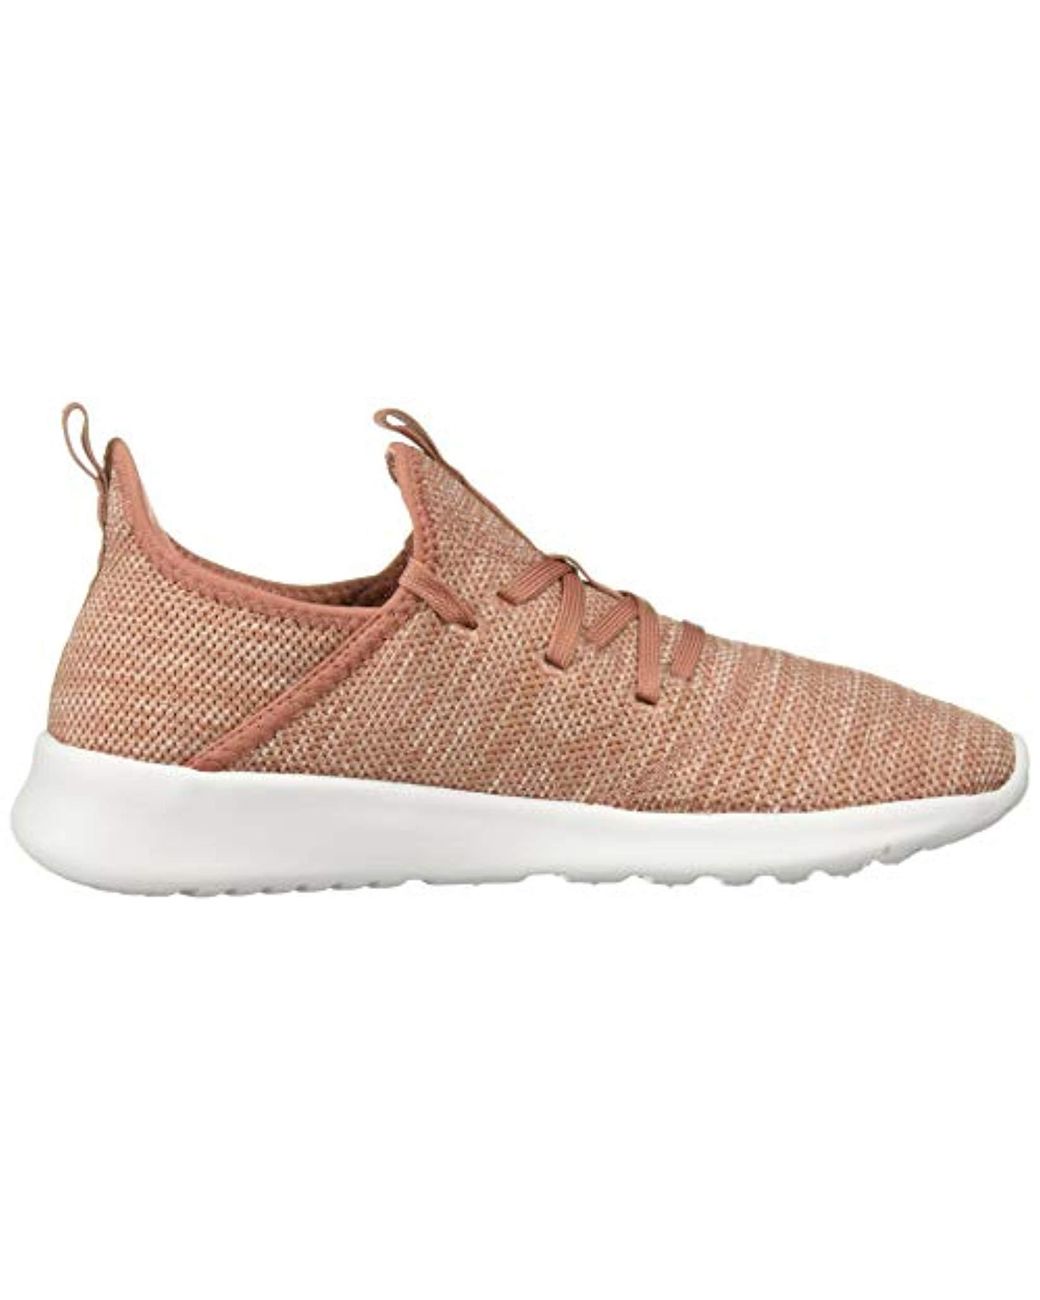 adidas Cloudfoam Pure Running Shoe in Pink/Pink/White (Pink) | Lyst